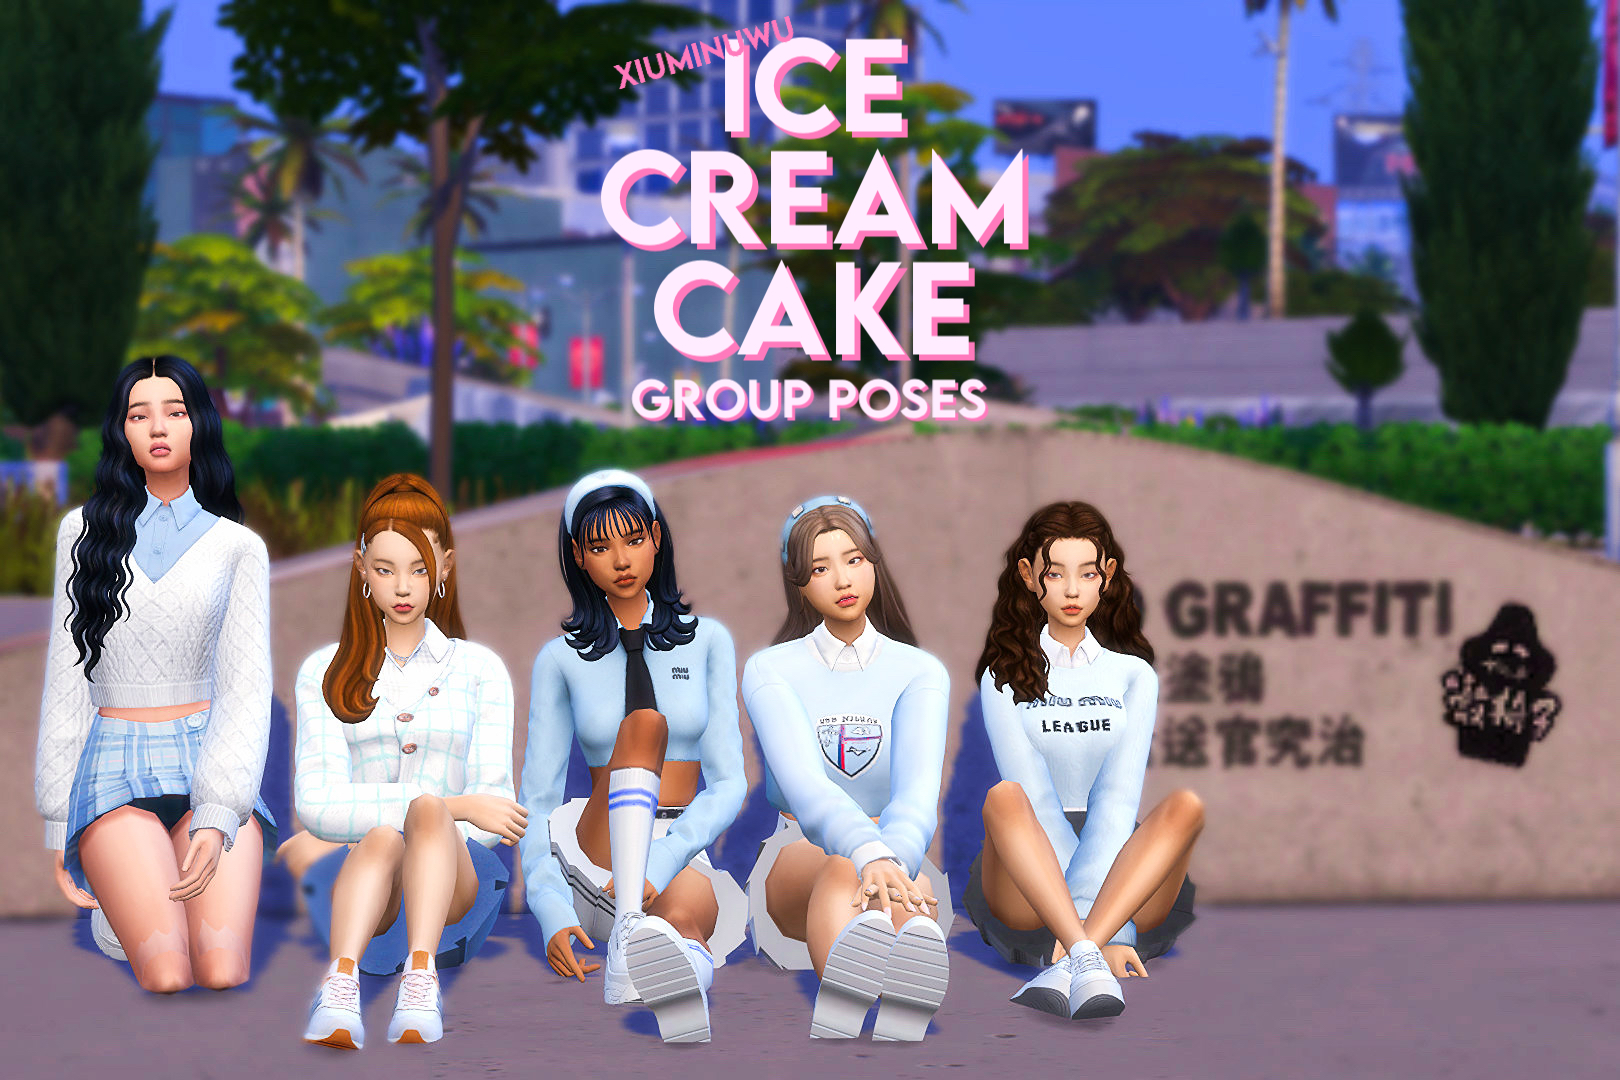 LOVE DIVE Group Poses by 2amentertainment - The Sims 4 Download -  SimsFinds.com